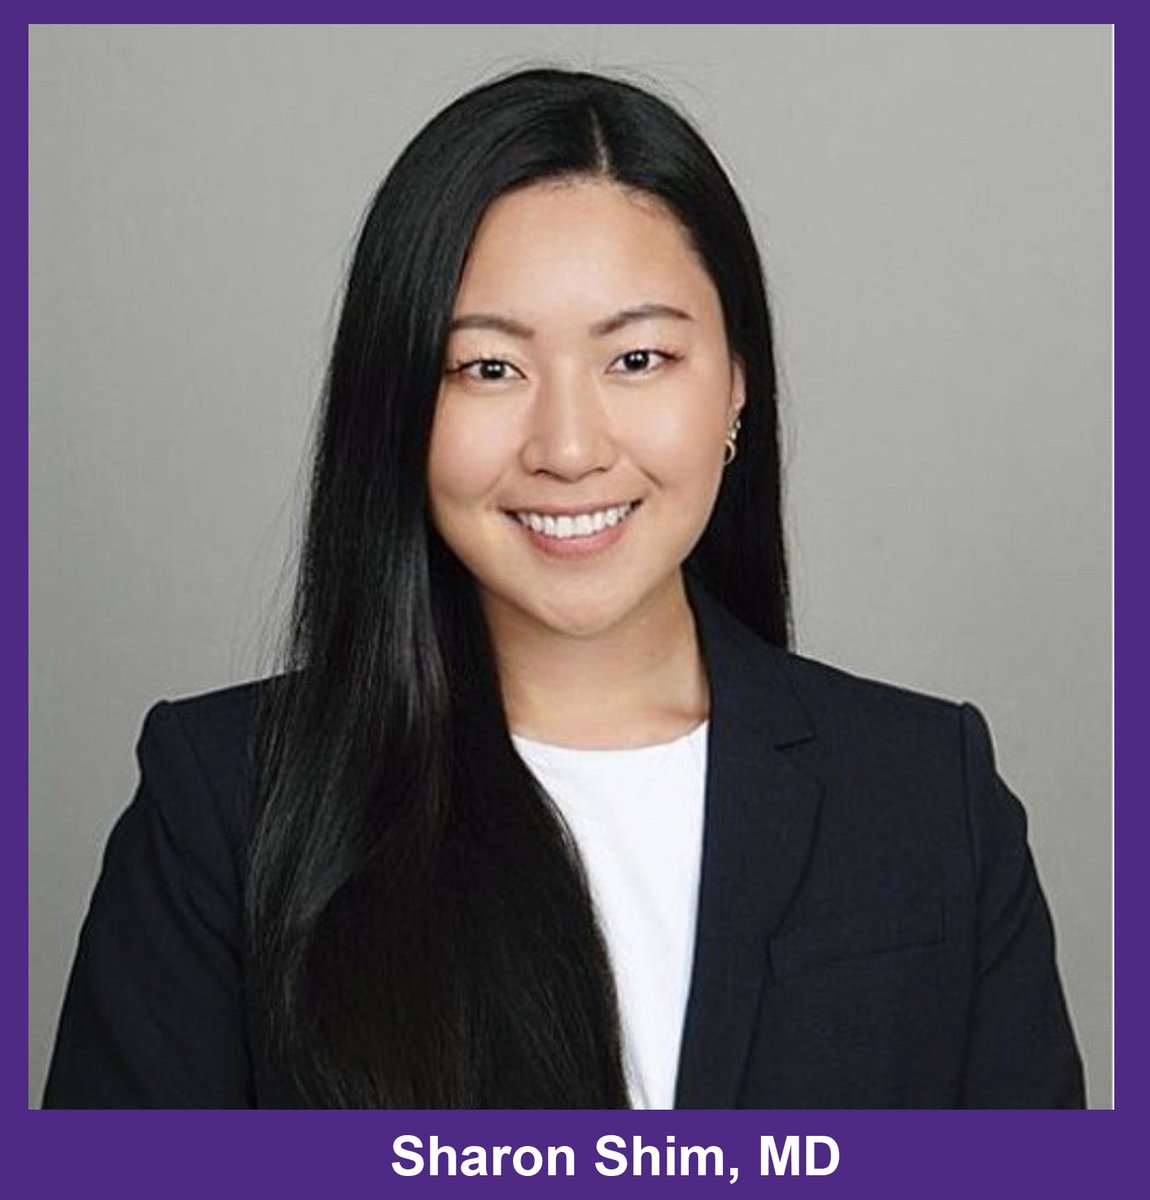 Congratulations to Sharon Shim, MD from Central Michigan University College of Medicine on matching in our Integrated Vascular Residency! 

We are thrilled to welcome you!
@NMSurgery @FutureVascSrgn #Match2024 #VascularMatch24 #VascMatch